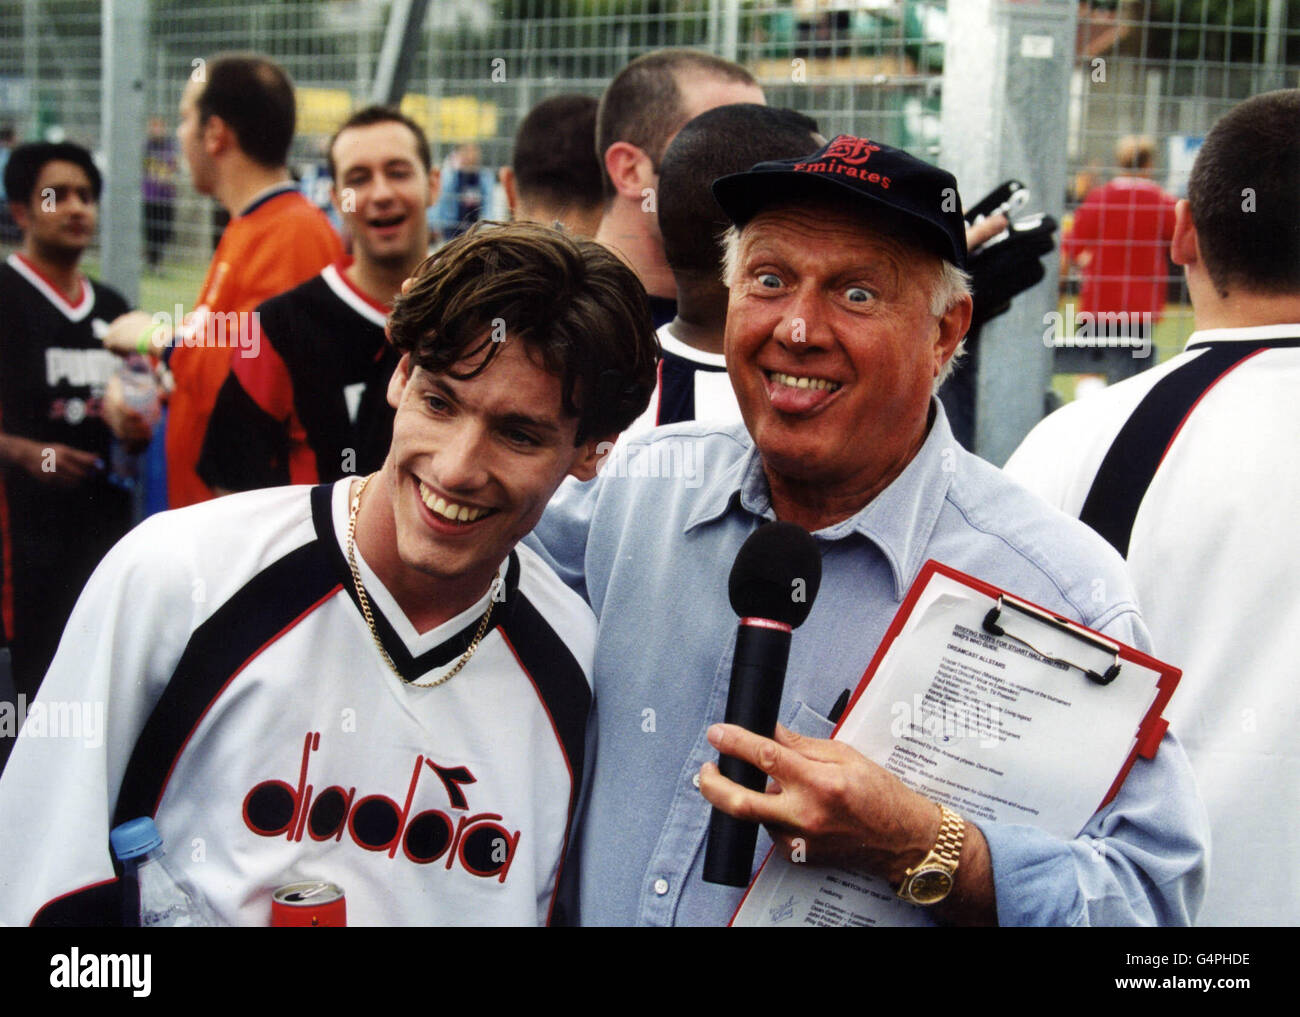 Dean Gaffney (left), who plays Robbie Jackson in Eastenders, with the presenter Stuart Hall, at the Dreamcast Millennium Cup 5-a-side Football Challenge, Tottenham, London. Stock Photo